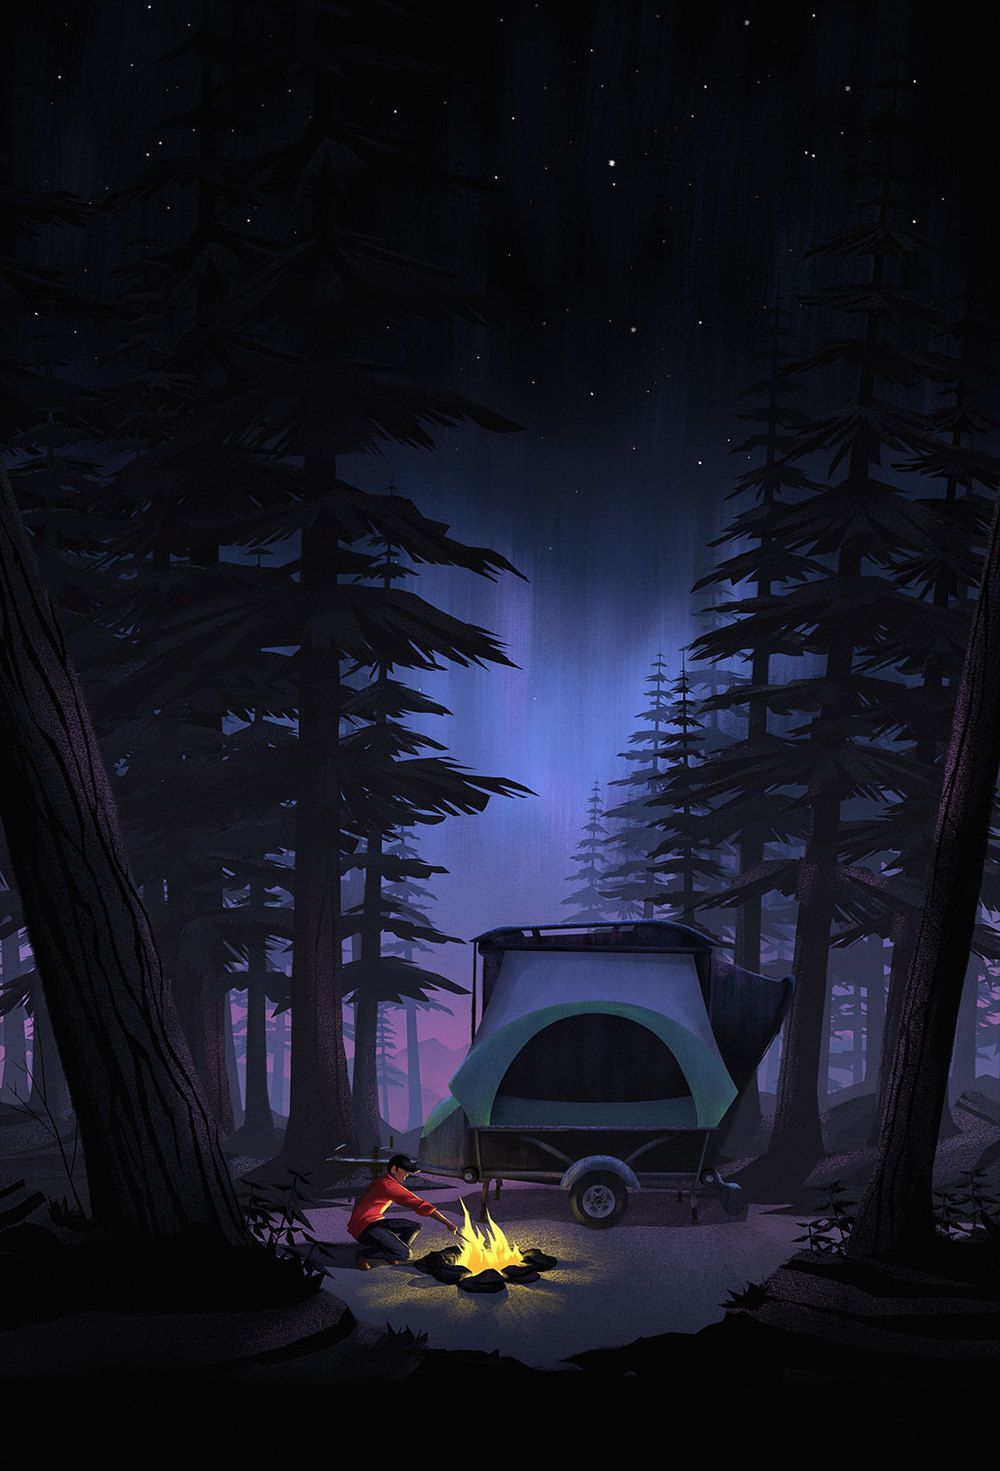 A campfire in the woods with an rv parked nearby - Camping